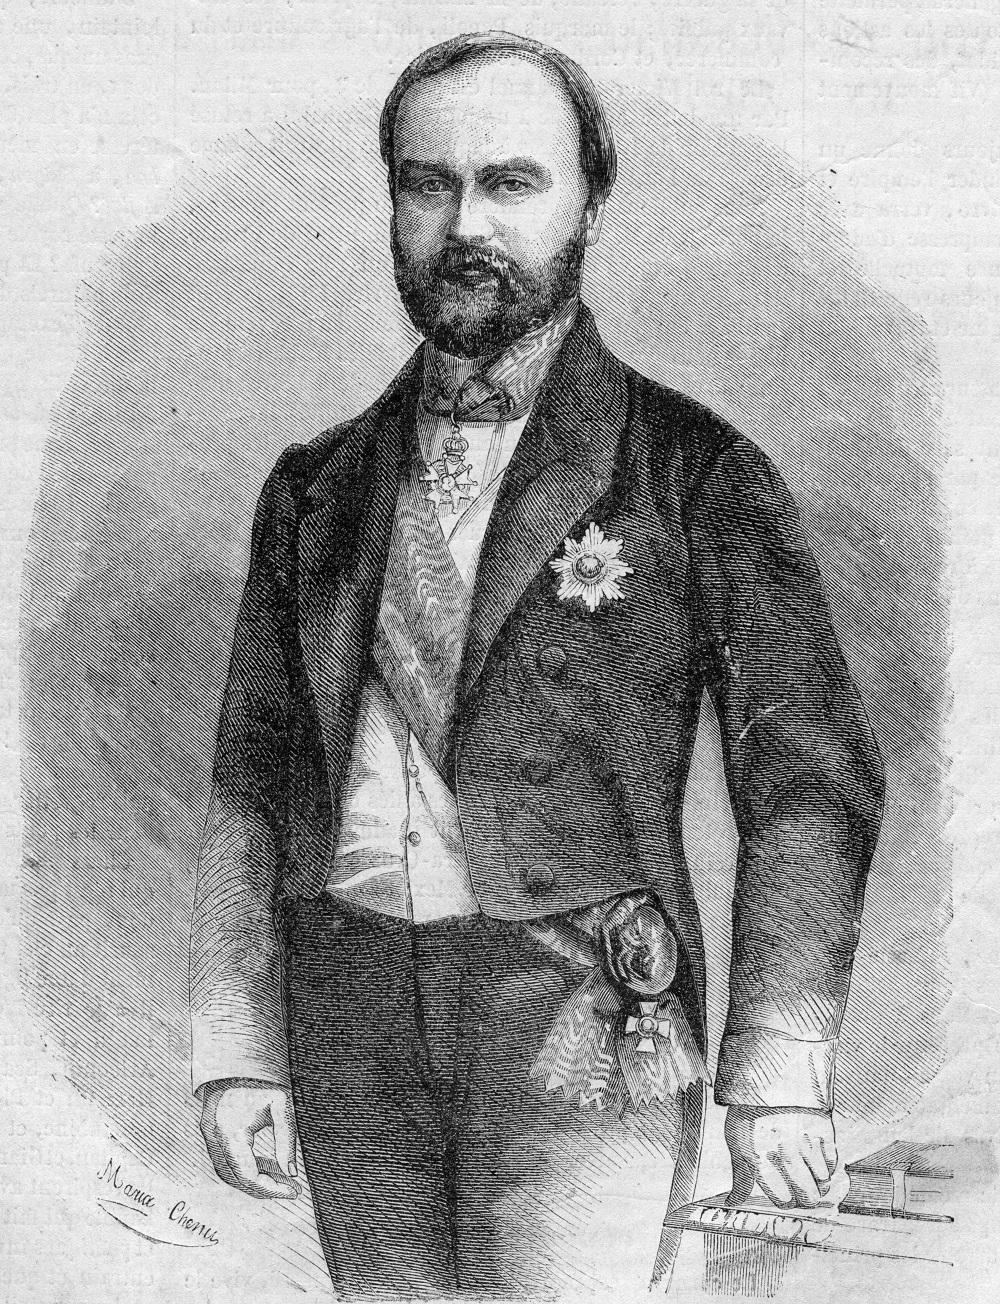 A historical black and white portrait of Dubois de Saligny wearing a beard and formal dress